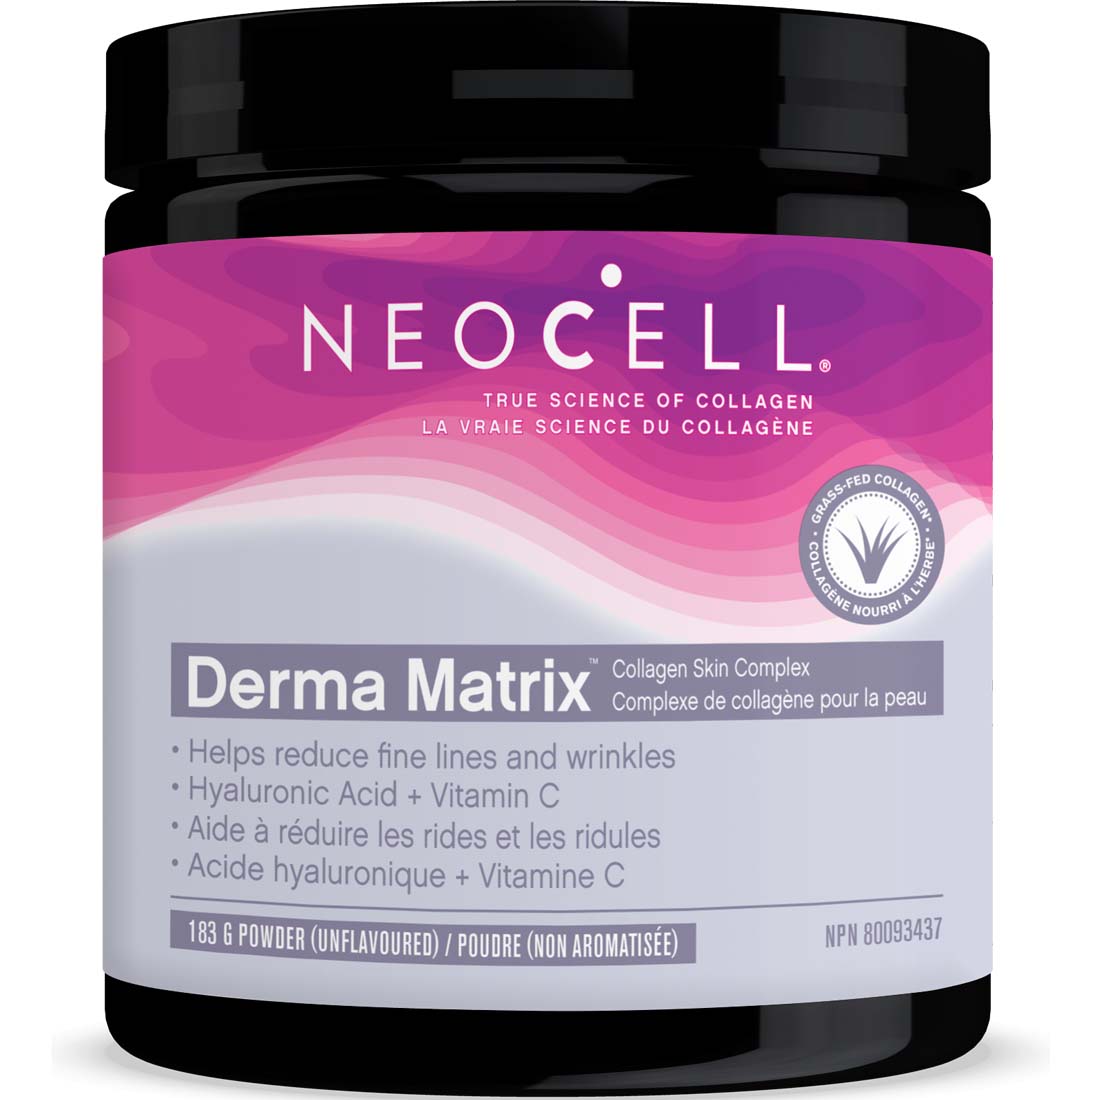 Neocell DermaMatrix Collagen with Hyaluronic Acid and Vitamin C, Helps reduce fine lines and wrinkles